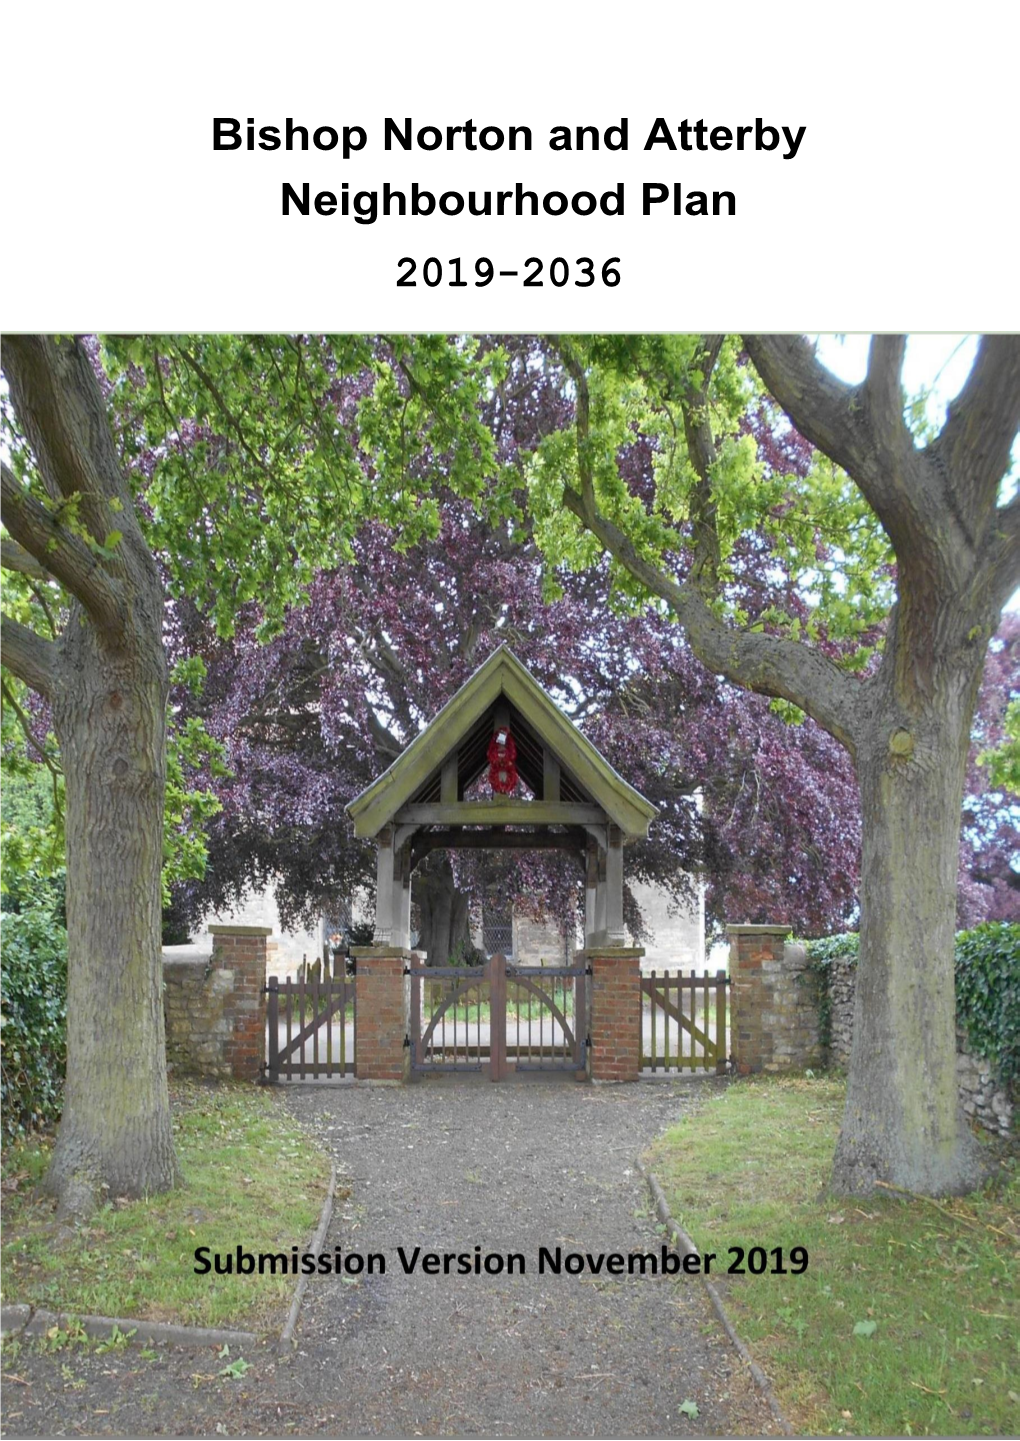 Bishop Norton and Atterby Neighbourhood Plan Submission